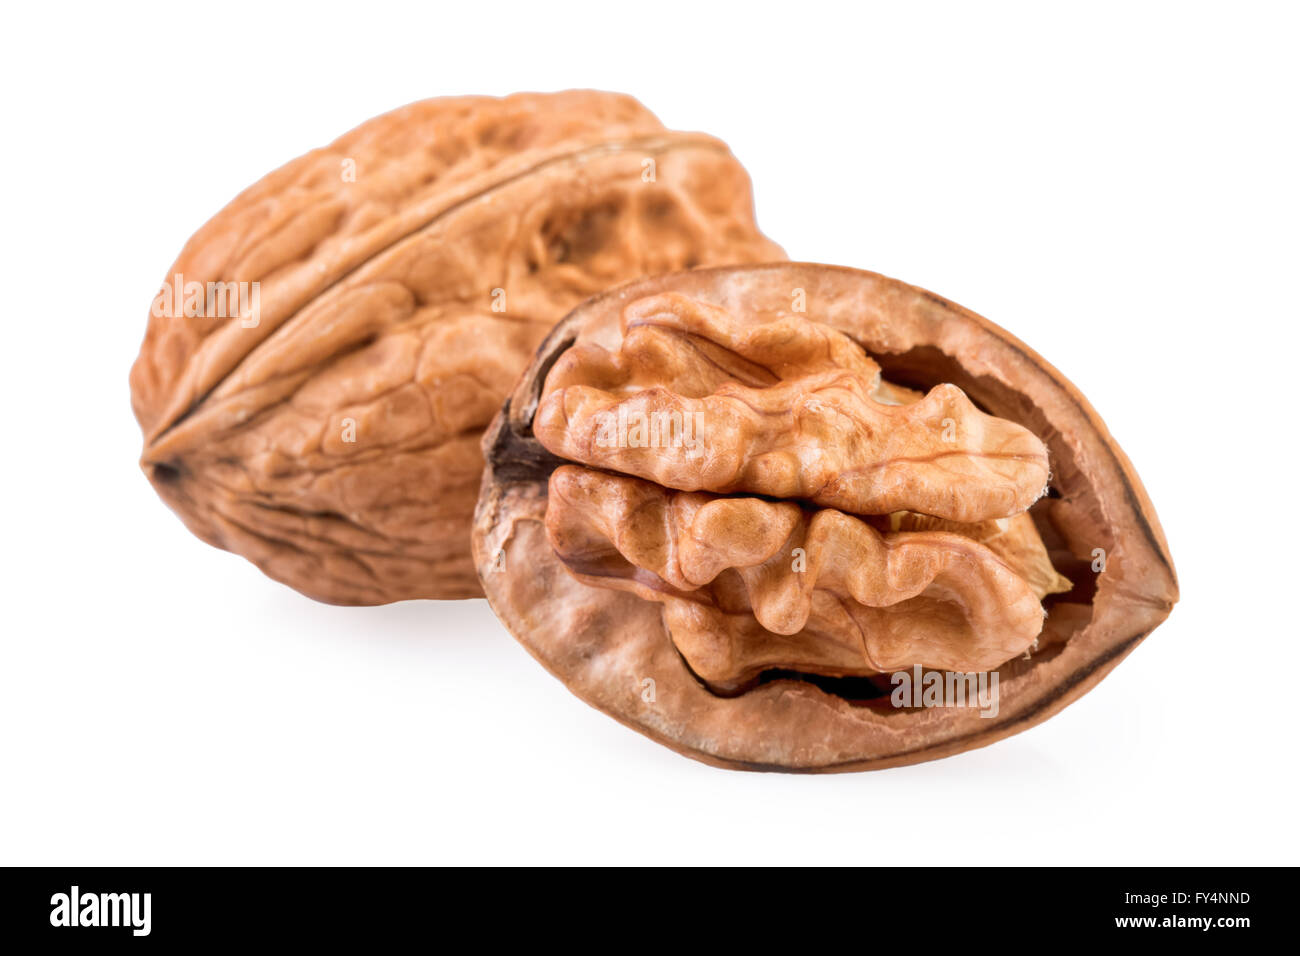 Two Walnuts whole and half in closeup. Stock Photo